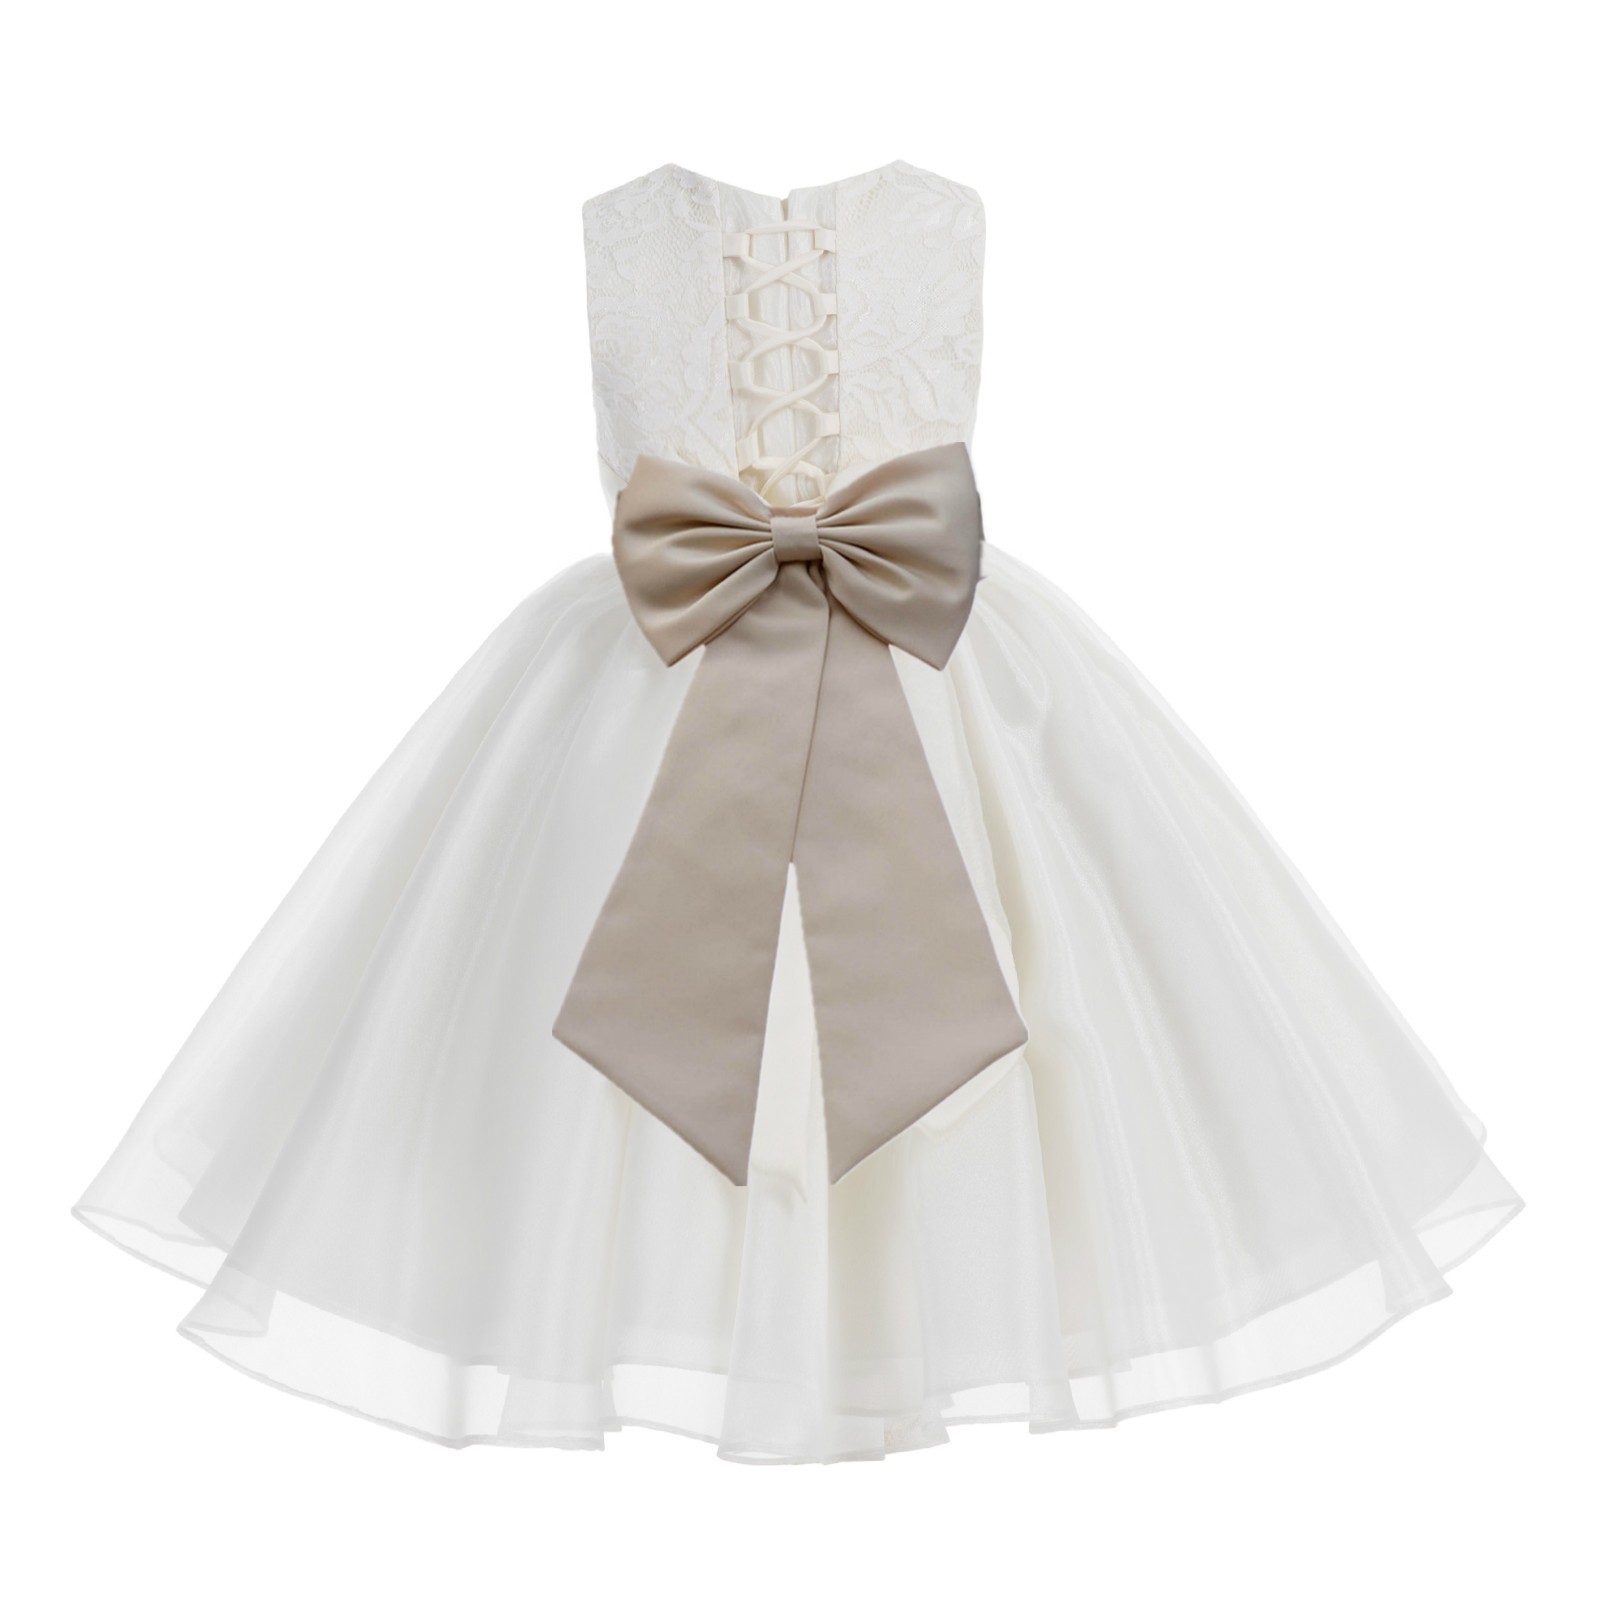 Ivory / Champagne Lace Organza Flower Girl Dress 186T